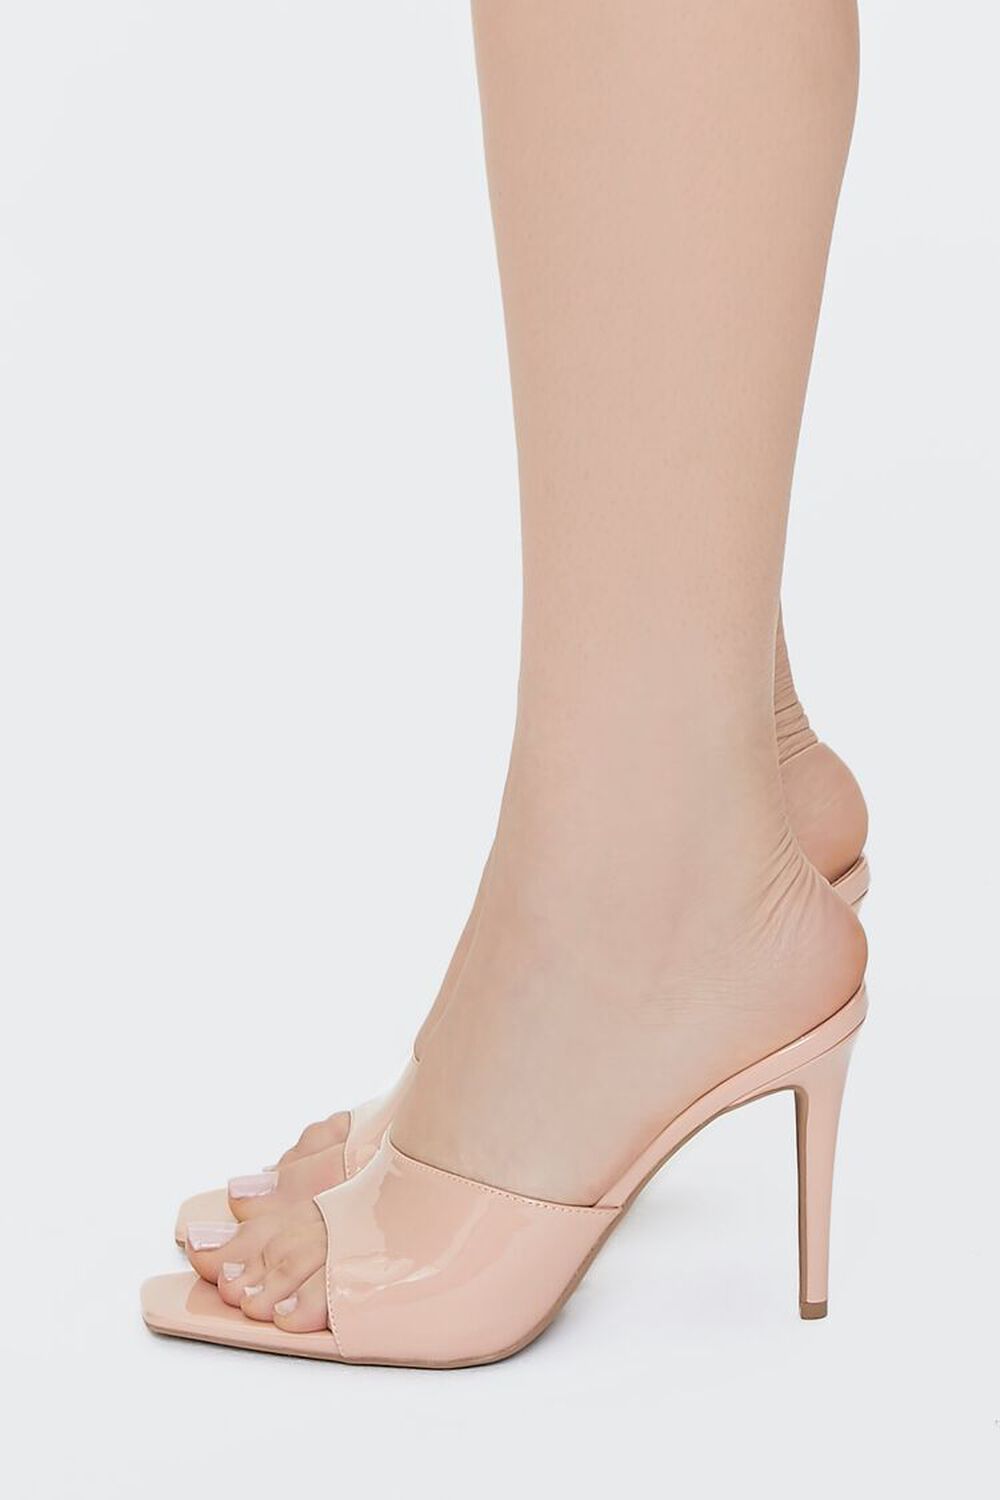 NUDE Faux Patent Leather Stiletto Heels, image 2